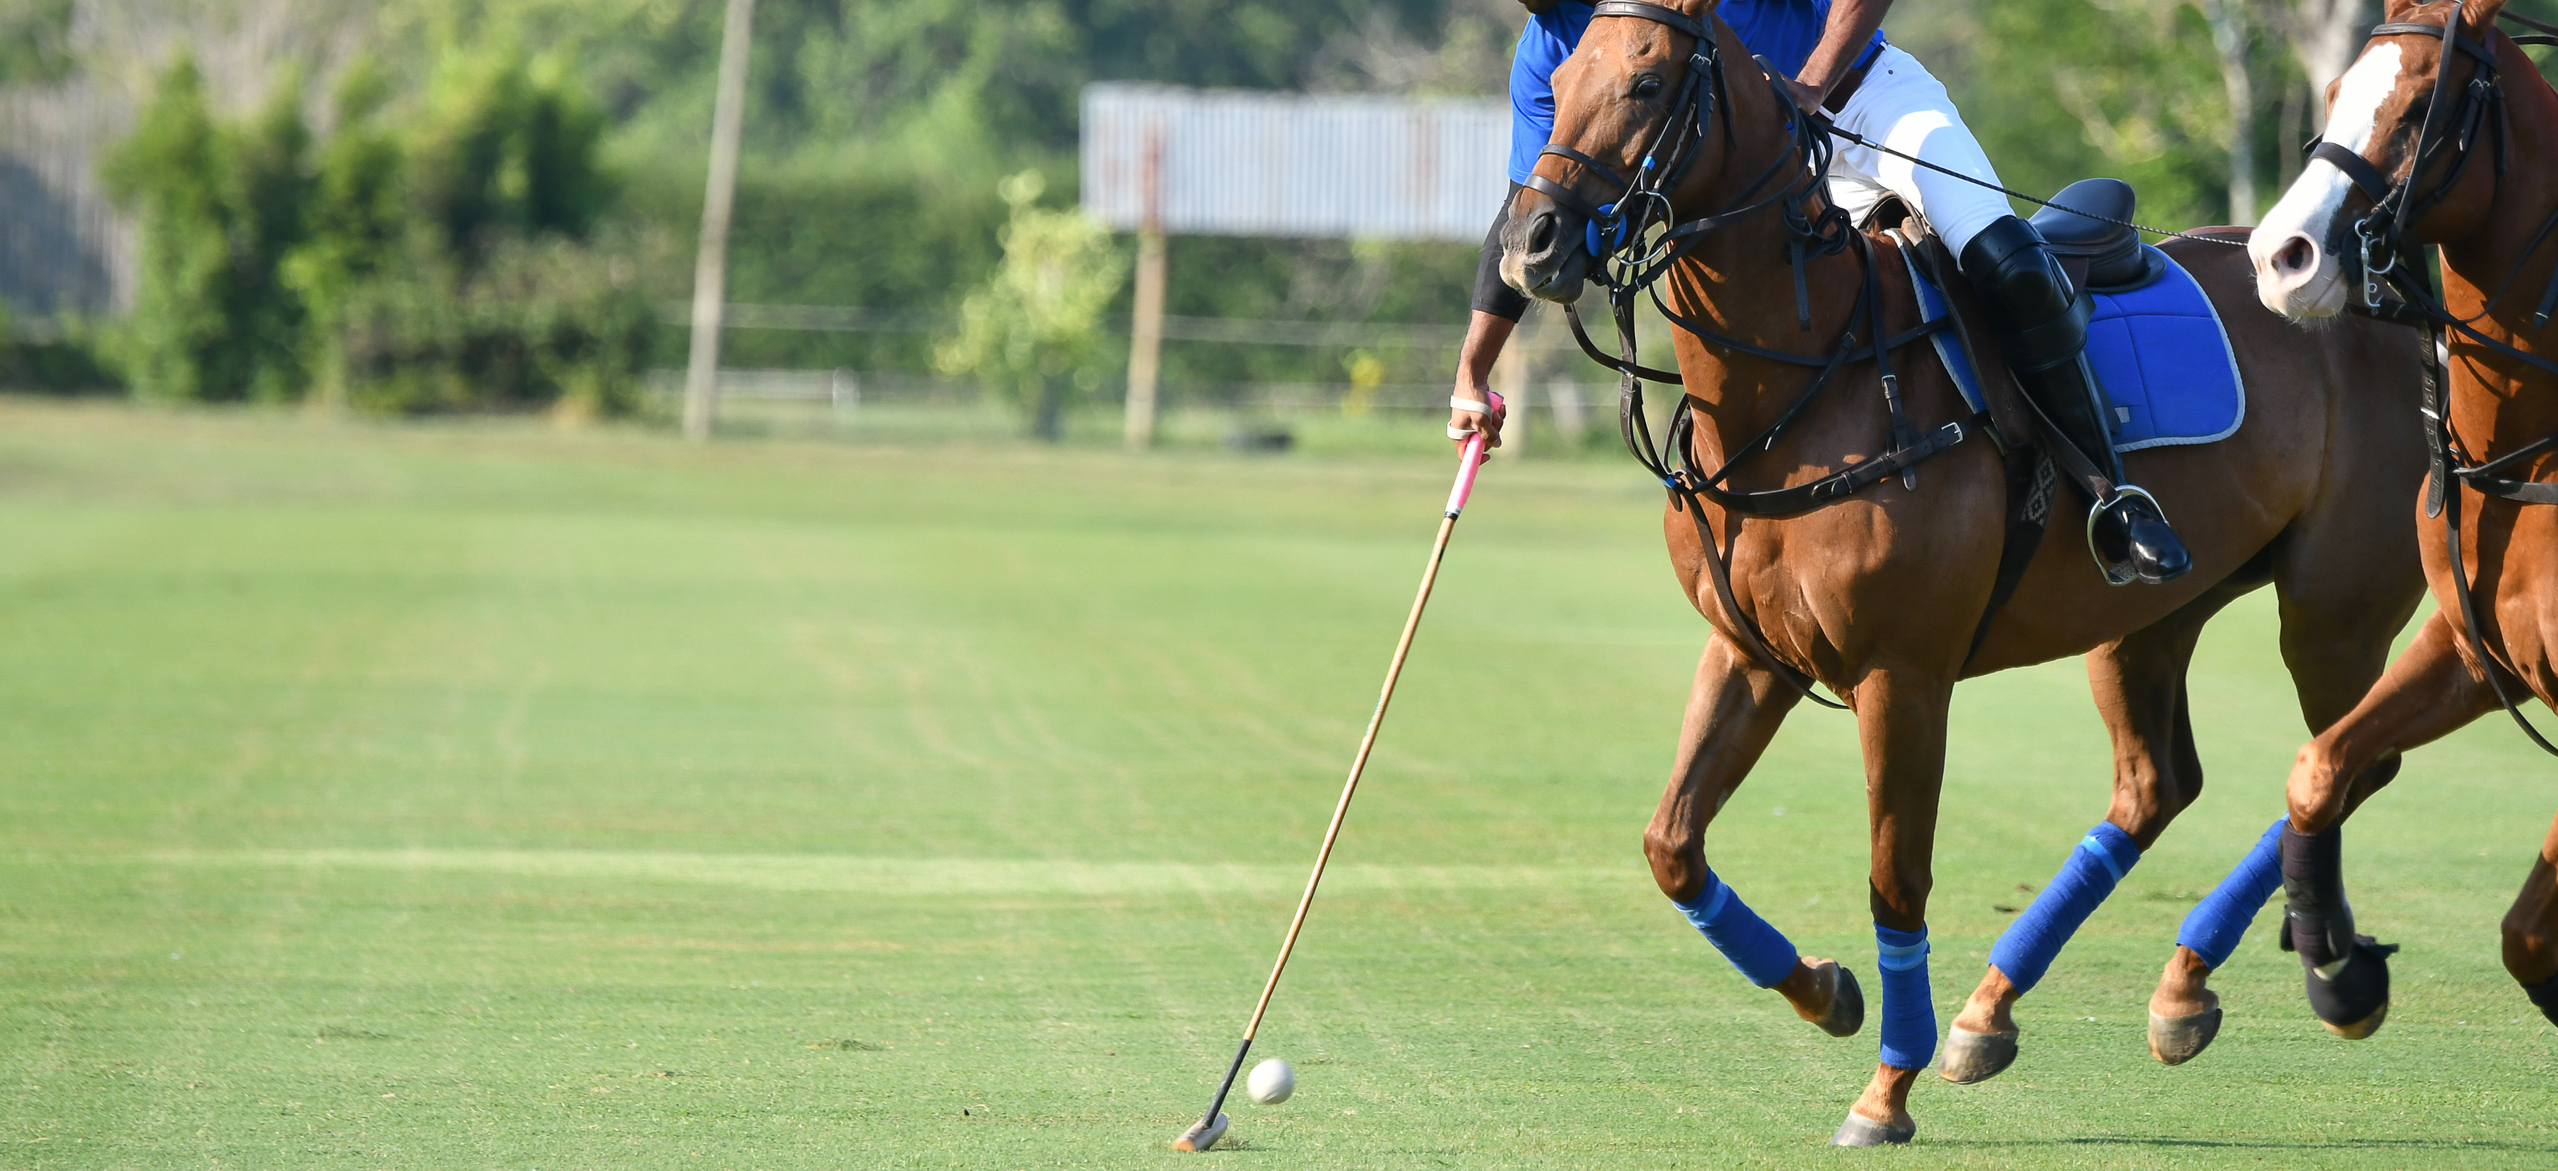 Get your fill of polo in the Hamptons this weekend.